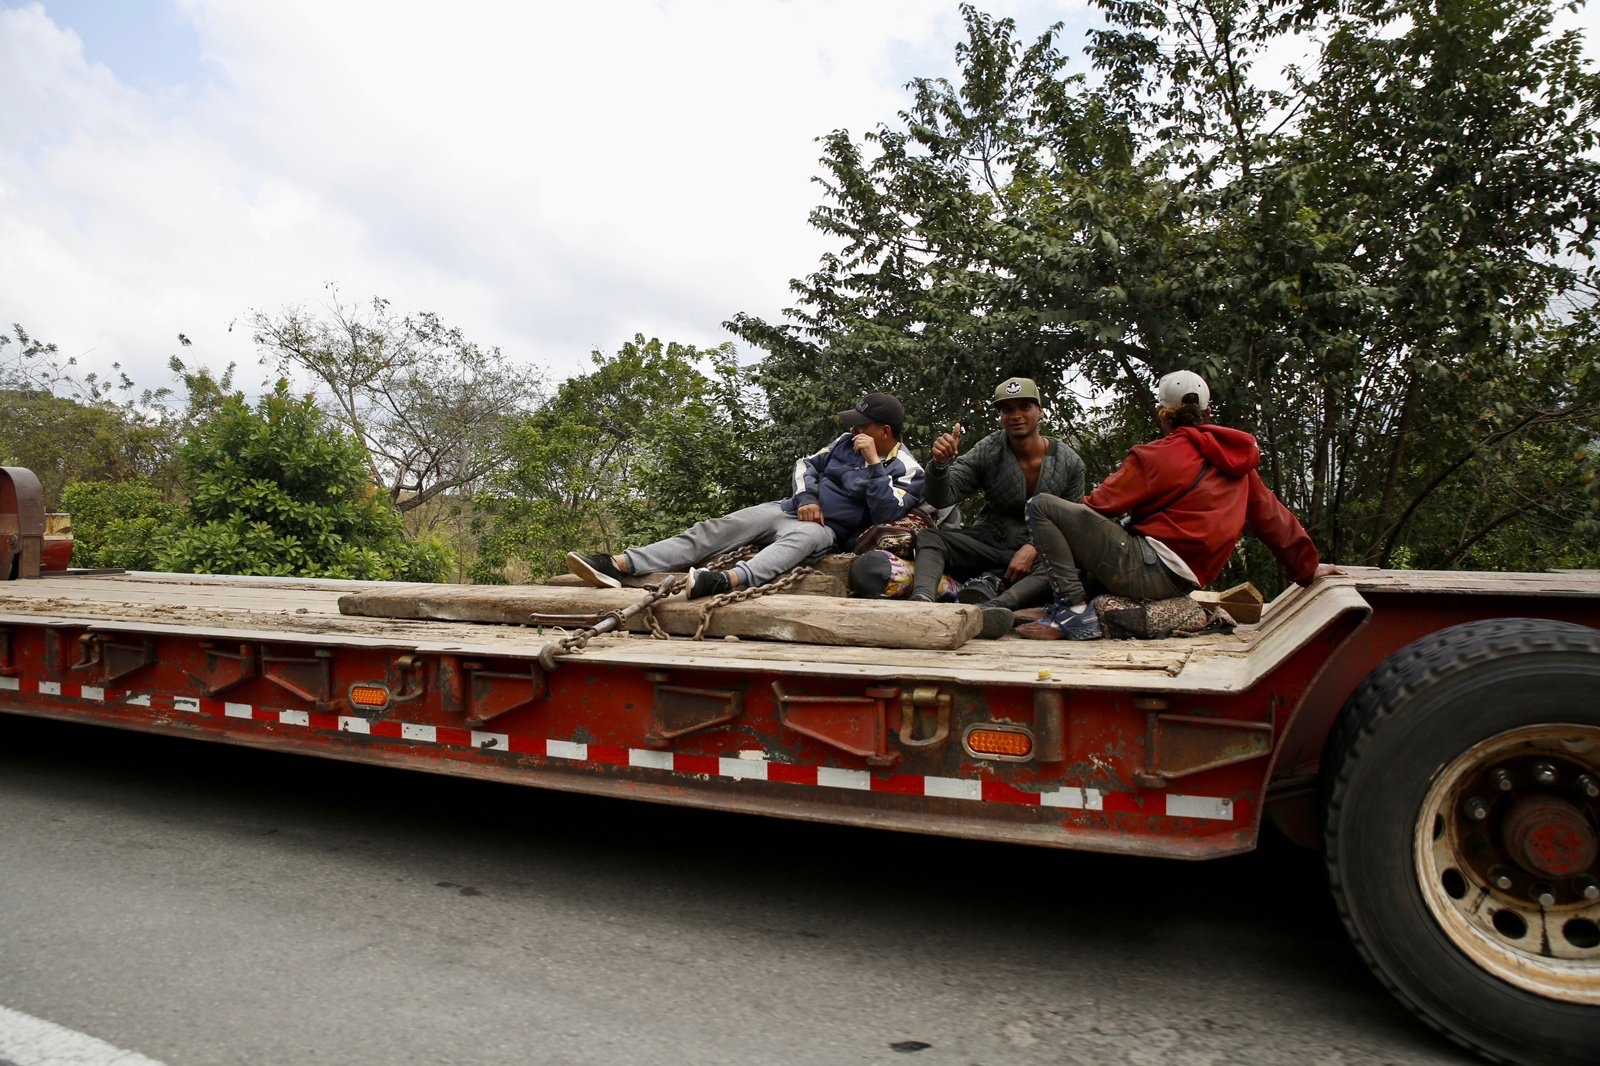 Migrants in Colombia heading to Darién say the US border is open